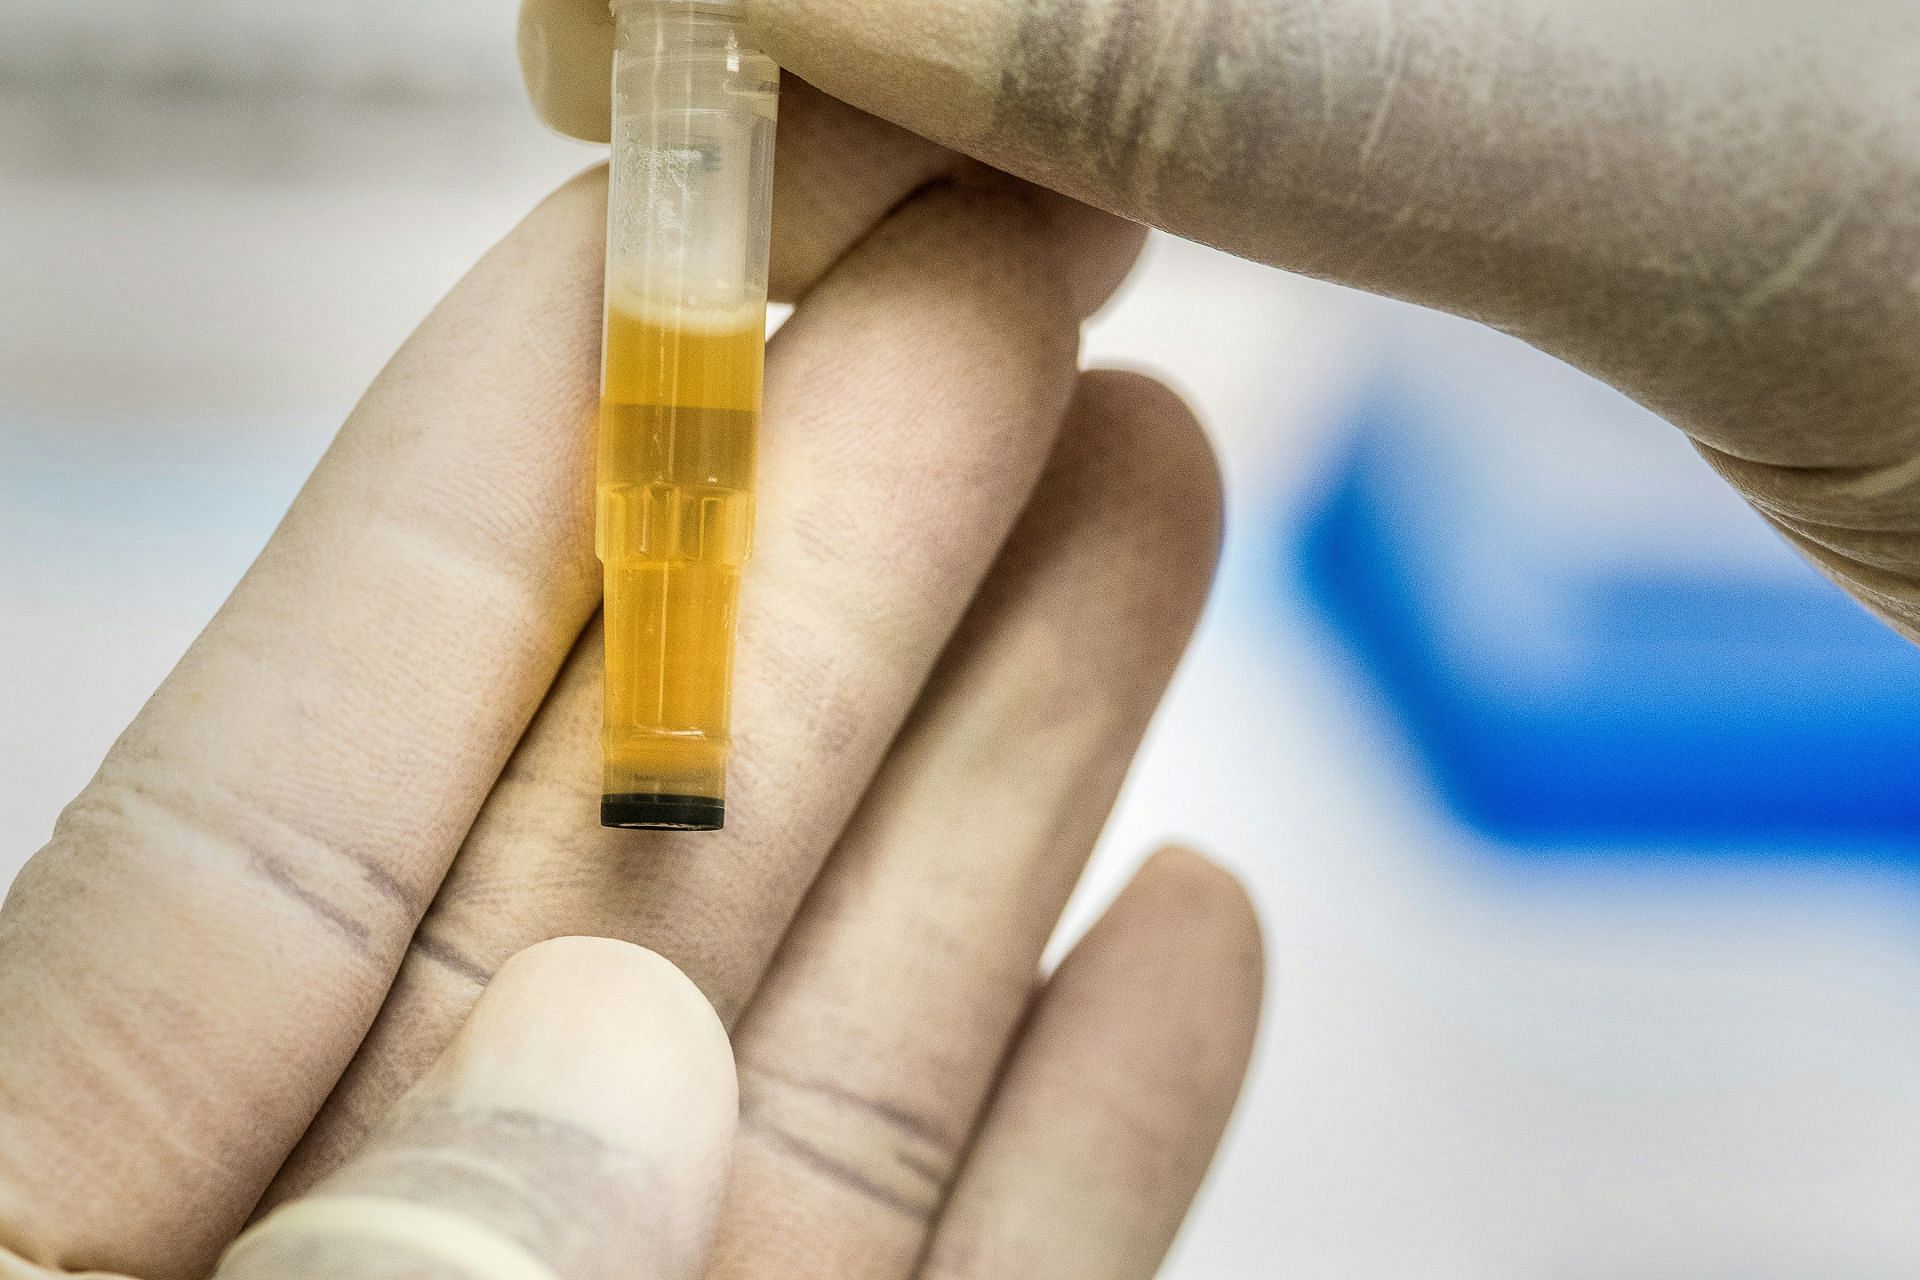 Excess bile can result in yellow urine (Image by CDC/Unsplash)